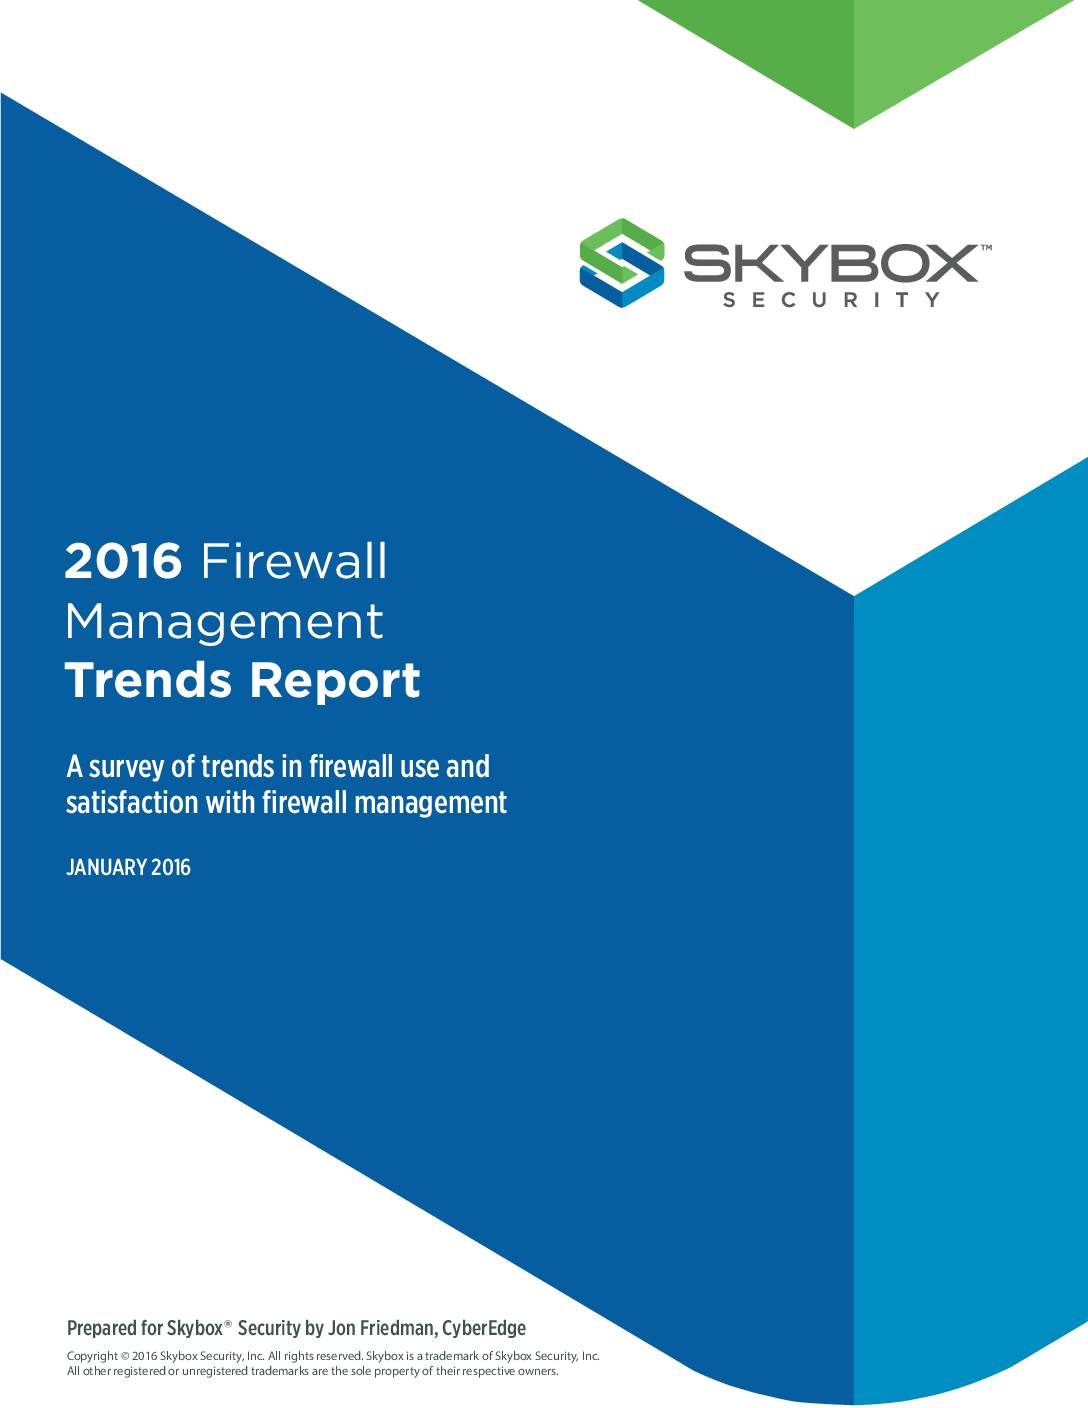 Featured image for 2016 Firewall Management Trends Report